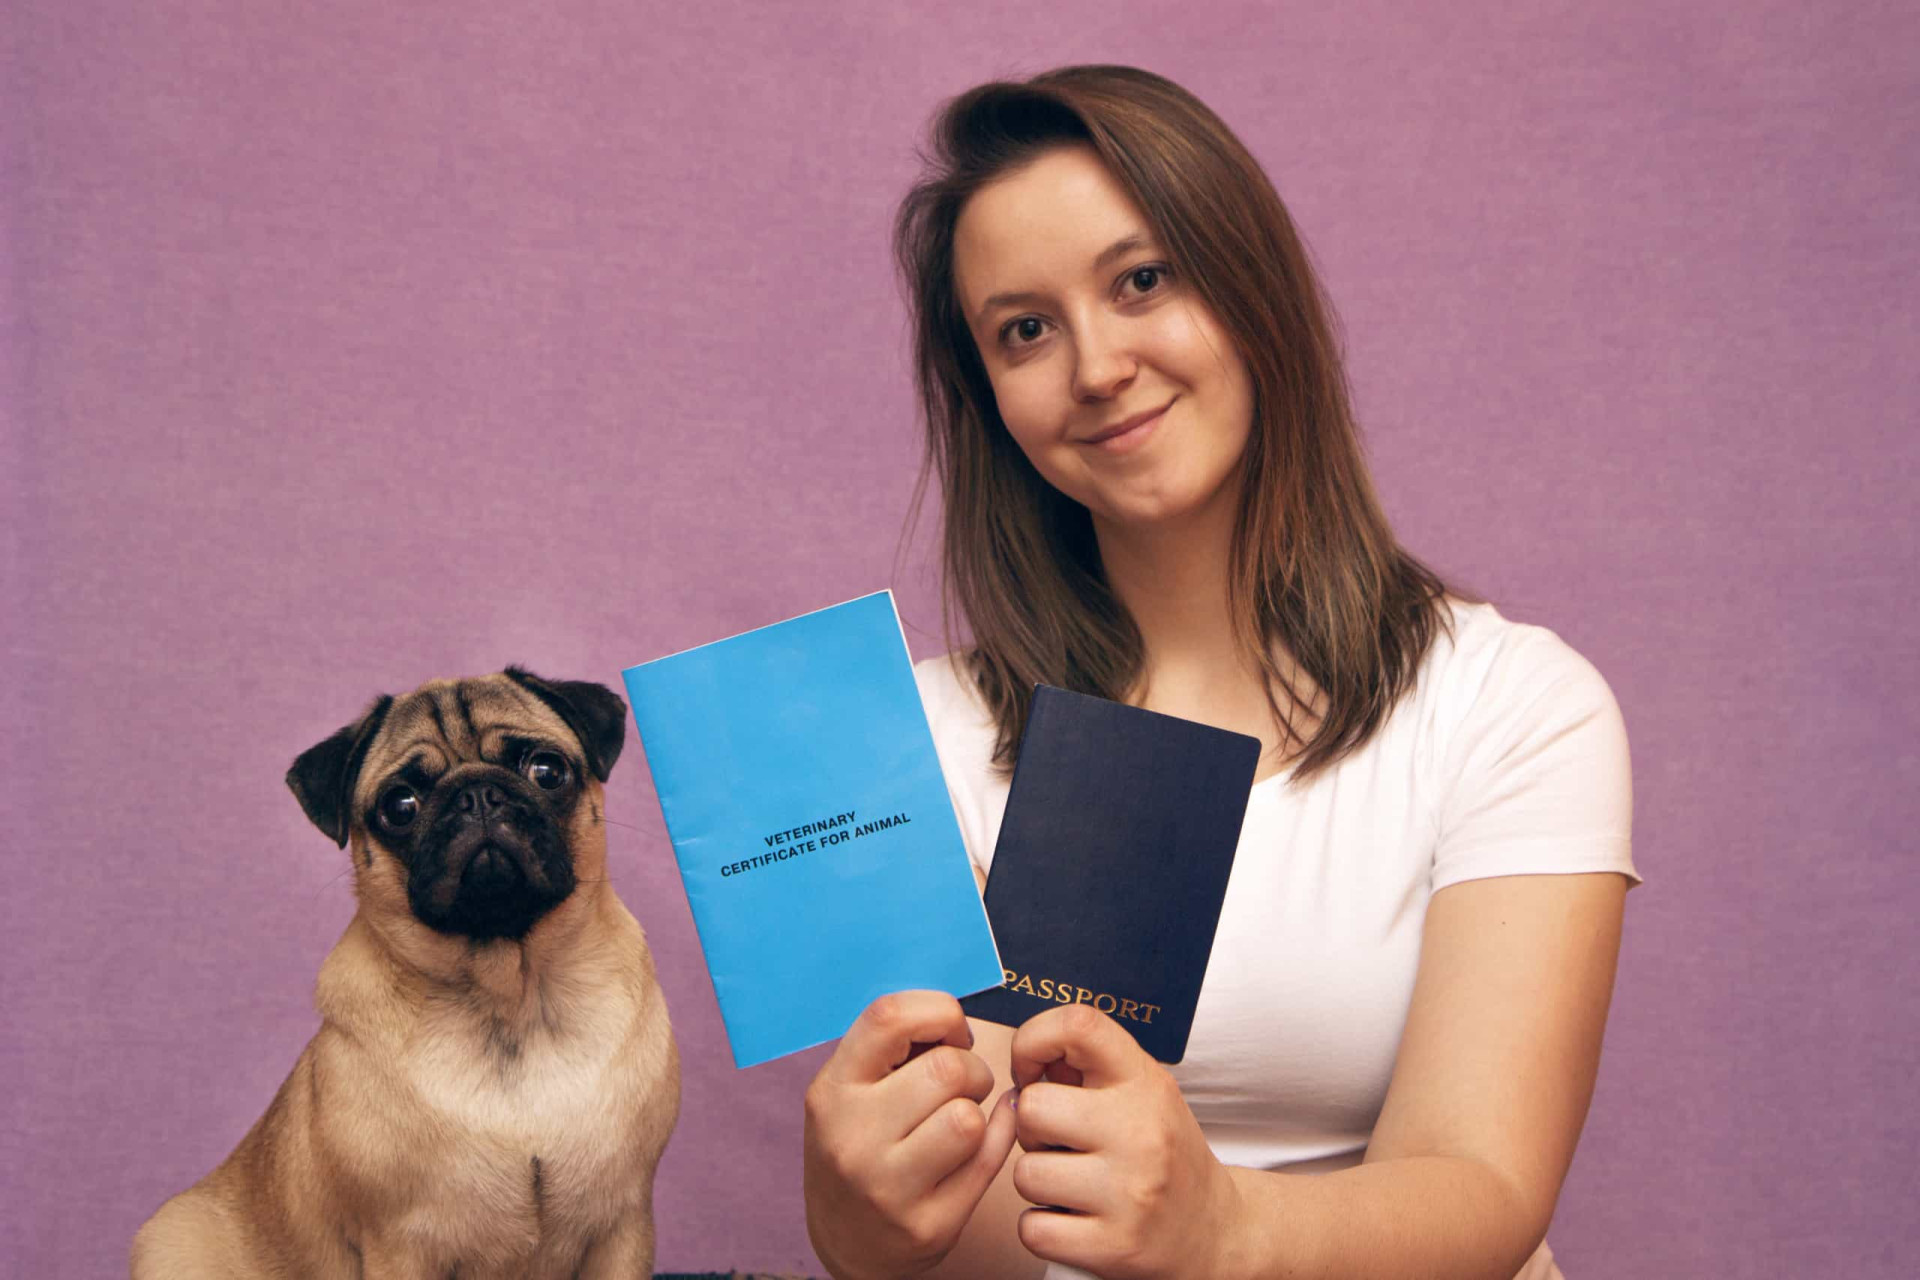 <p>You should organize all your dog’s documents and bring them with you. These include medical records, microchip number, and even a pet passport in some parts of the world.</p><p>You may also like:<a href="https://www.starsinsider.com/n/292397?utm_source=msn.com&utm_medium=display&utm_campaign=referral_description&utm_content=719768en-us"> Dramatic Aussie celebrity break-ups</a></p>